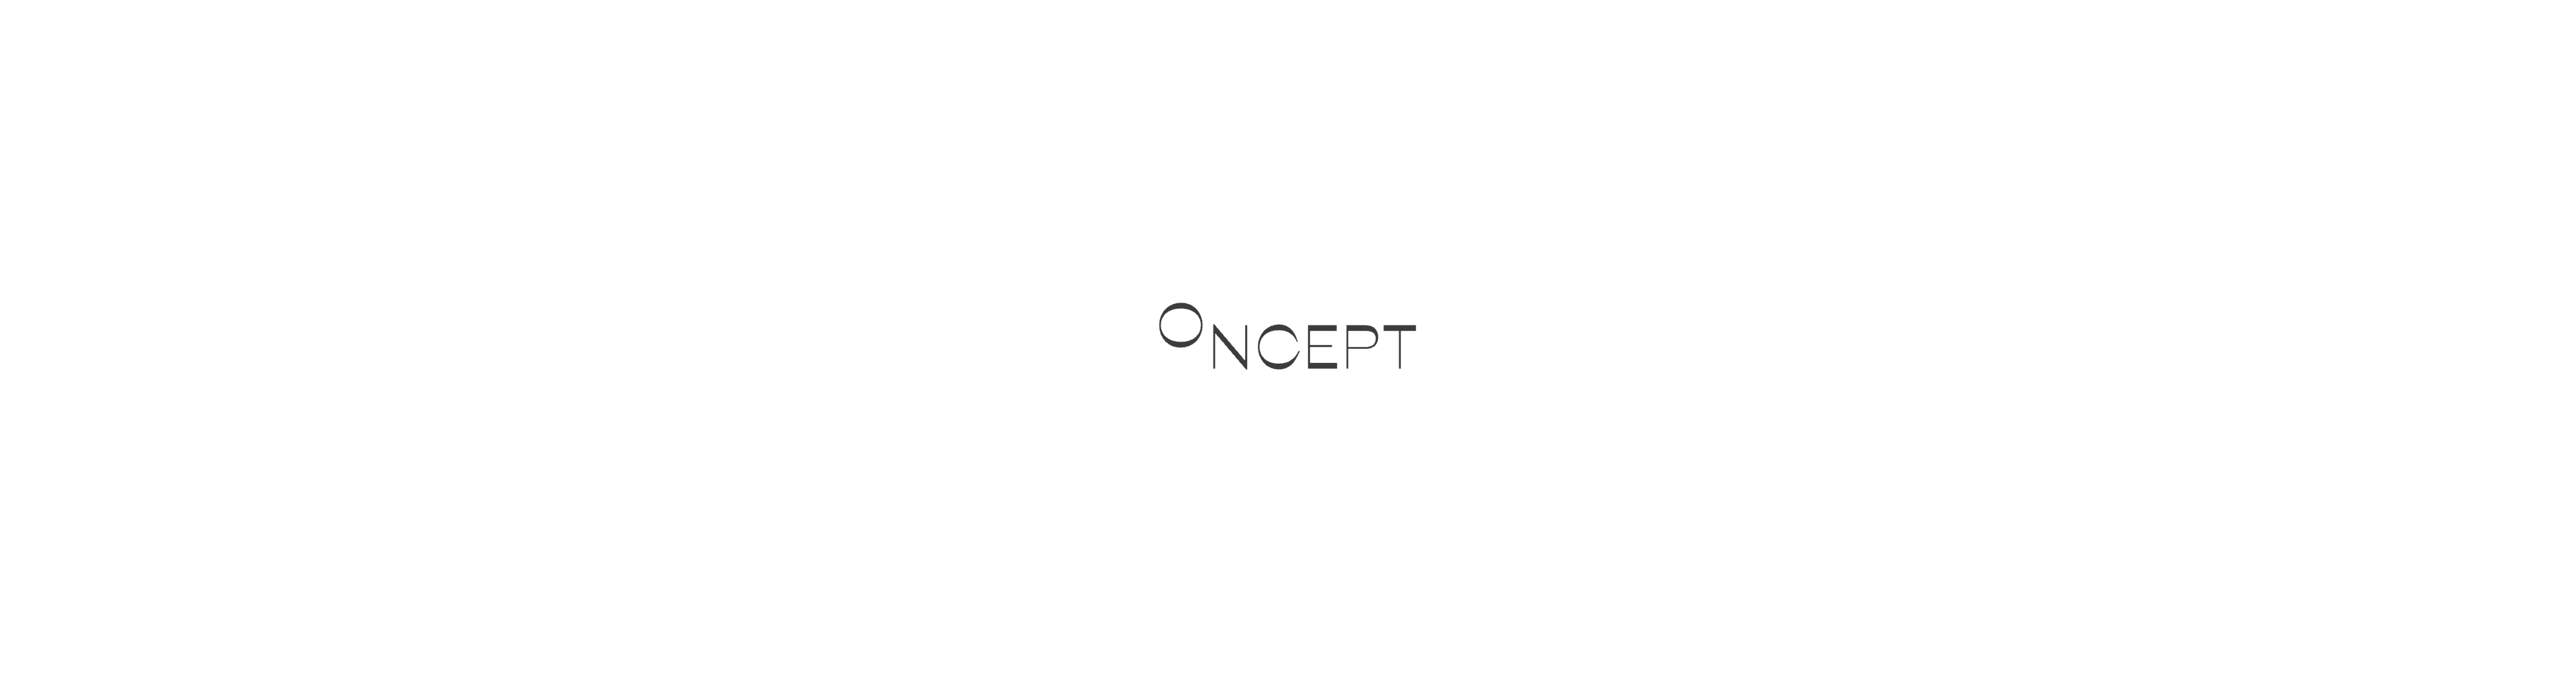 oncept